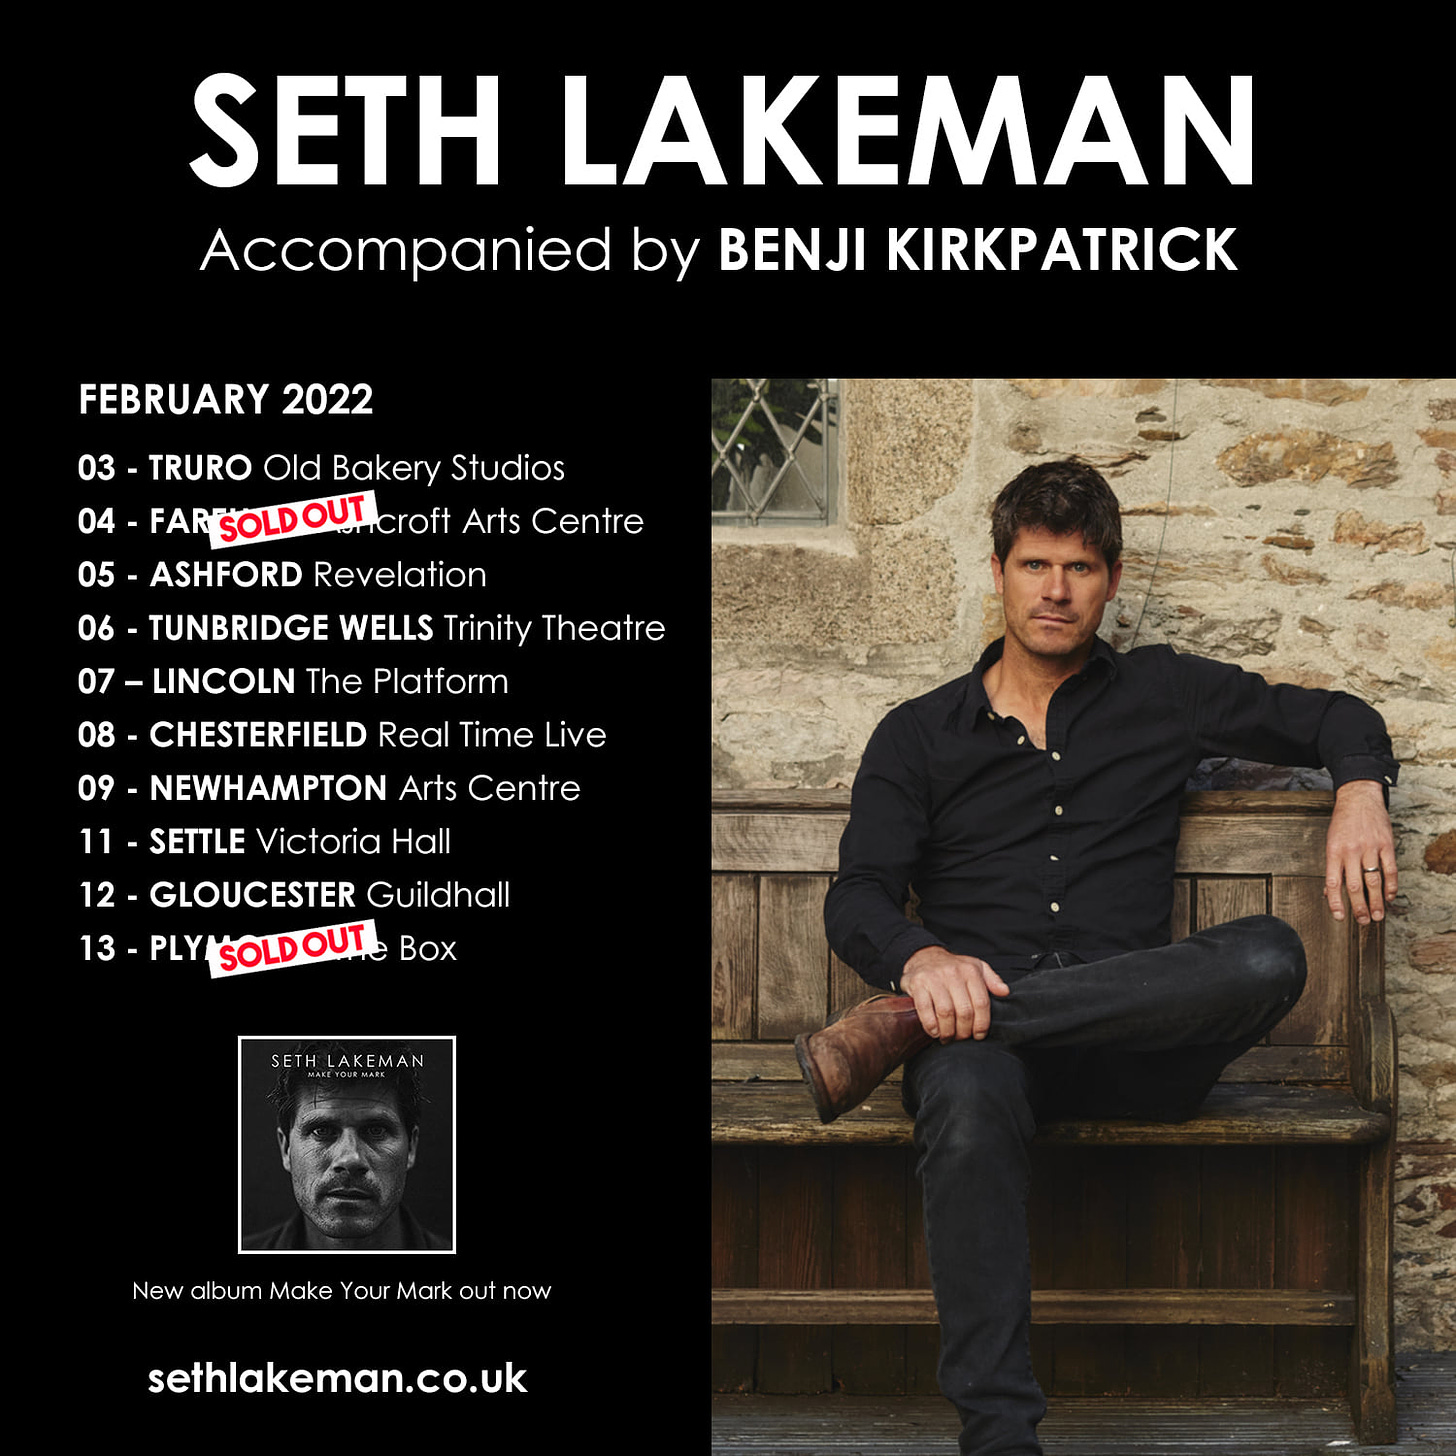 May be an image of 2 people and text that says "SETH LAKEMAN Accompanied by BENJI KIRKPATRICK FEBRUARY 2022 03 TRURO Old Bakery Studios 04 FAROLO croft Arts Centre 05 -ASHFORD Revelation -TUNBRIDGE WELLS Trinity Theatre 07-LINCON The Platform 08 CHESTERFIELD Real Time Live 09 -NEWHAMPTON Arts Centre 11-SETTLE Victoria Hall 12 GLOUCESTER Guildhall SOLDOUT Box New album Make Your Youa out now sethlakeman.co.uk"